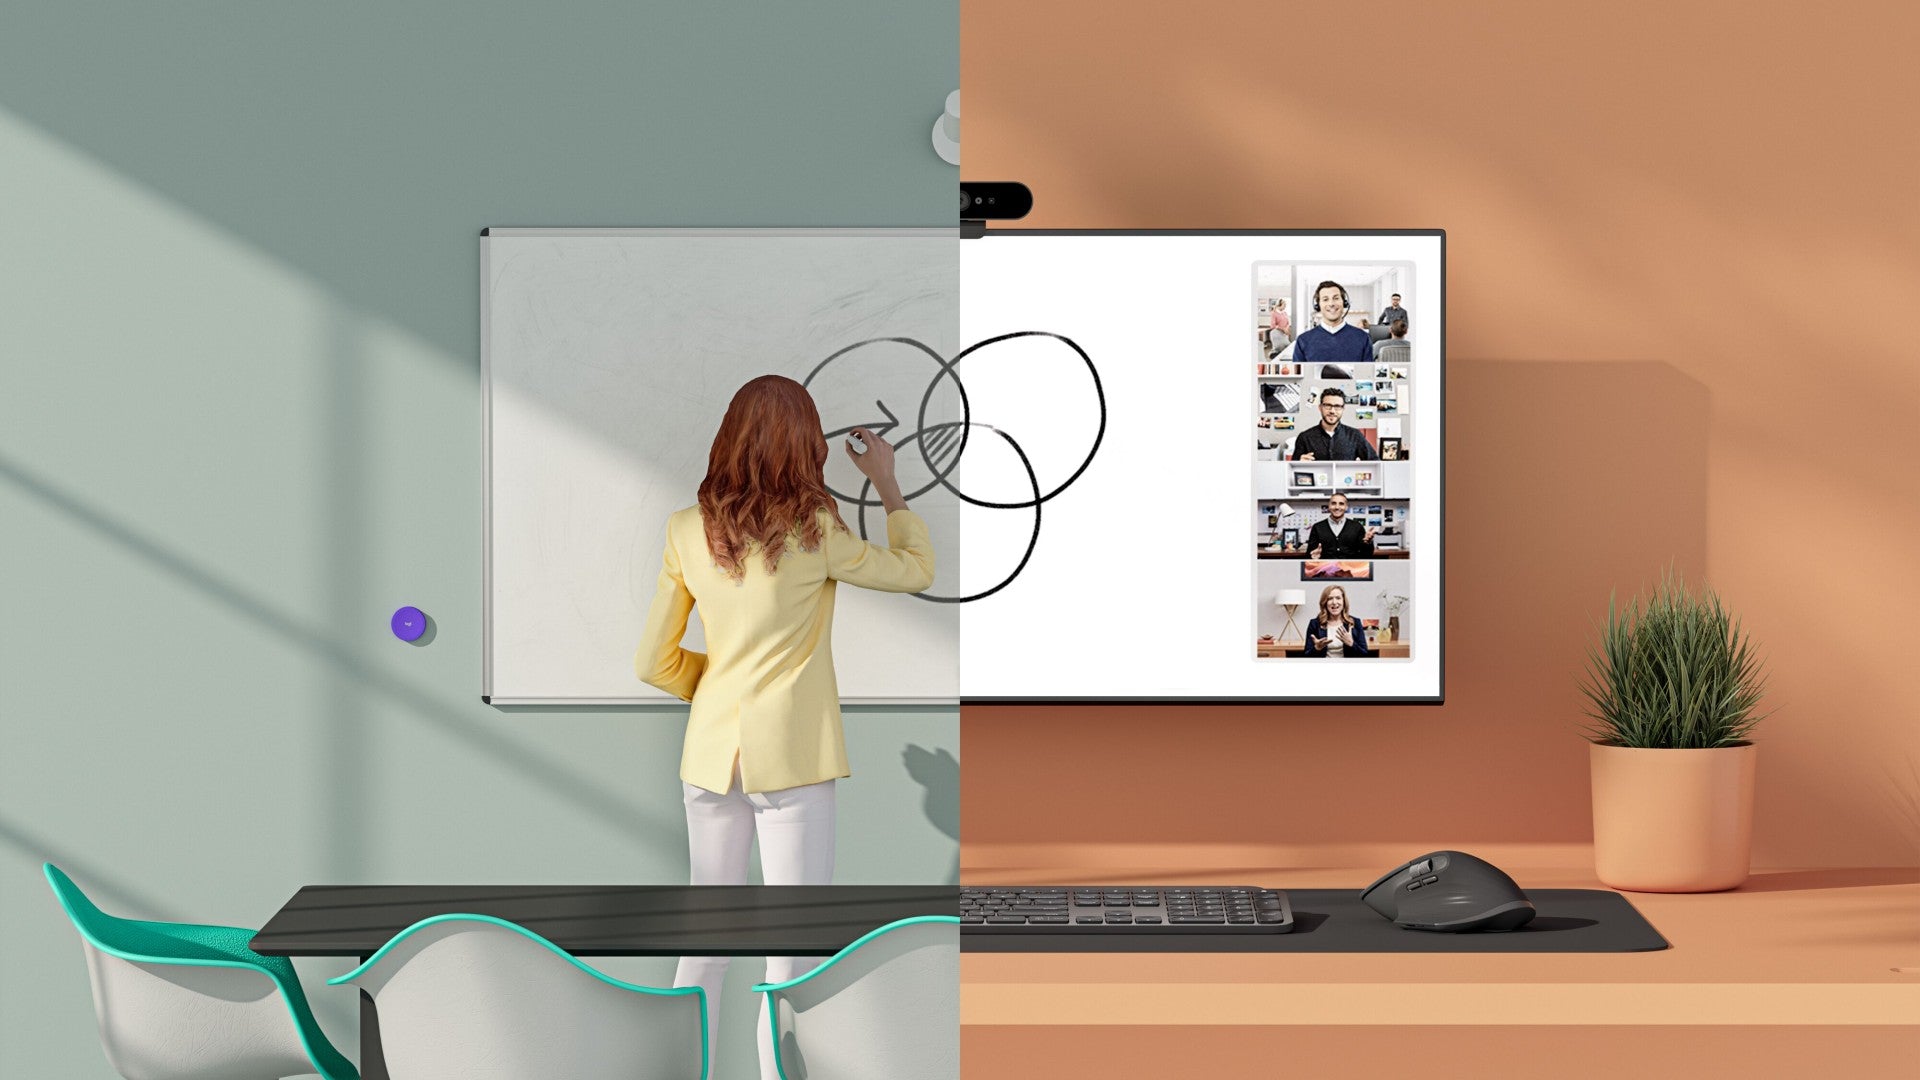 An image split vertically down the middle into two sections. On the left-hand side, there is an image of a woman in a meeting room drawing on a whiteboard. A Logitech Scribe is mounted on the wall above the whiteboard and a share button is mounted next to the whiteboard. On the right-hand side, there is an image of a video call on a desktop screen. The video call shows a clear view of what the woman in the meeting room is drawing on the whiteboard.